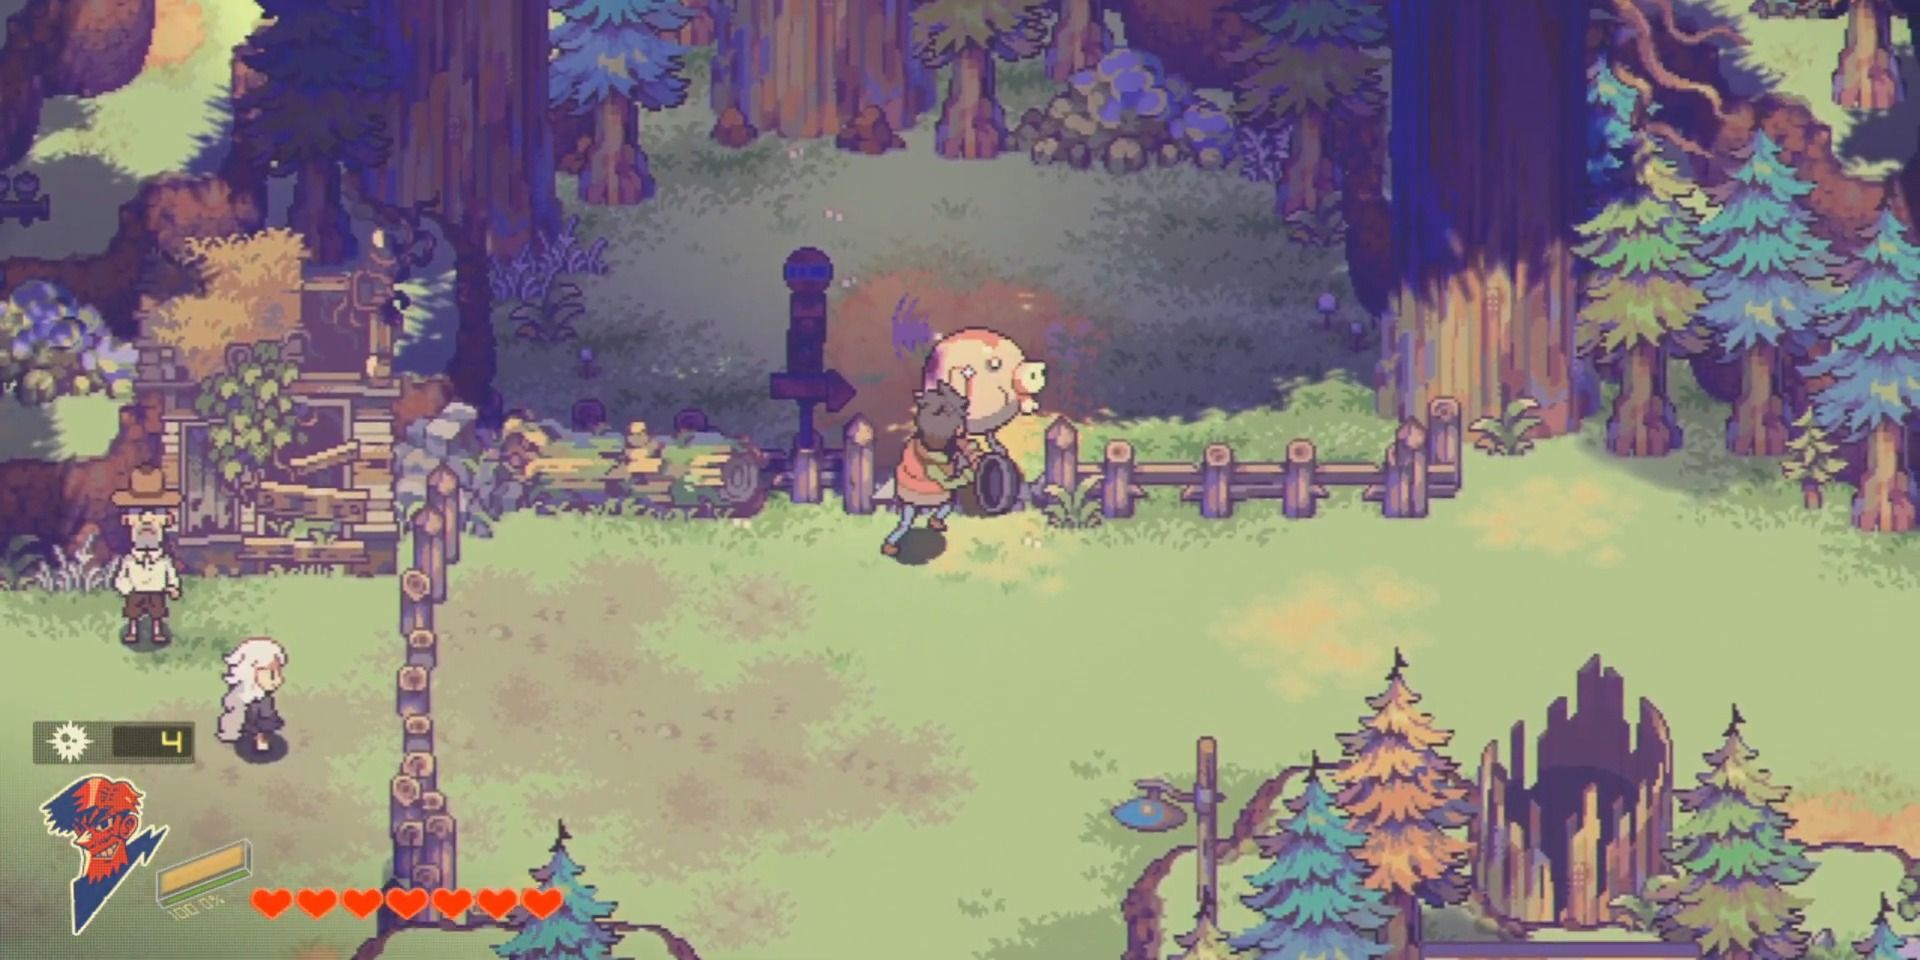 A screenshot showing gameplay from the blimpig herding mini-game in Eastward